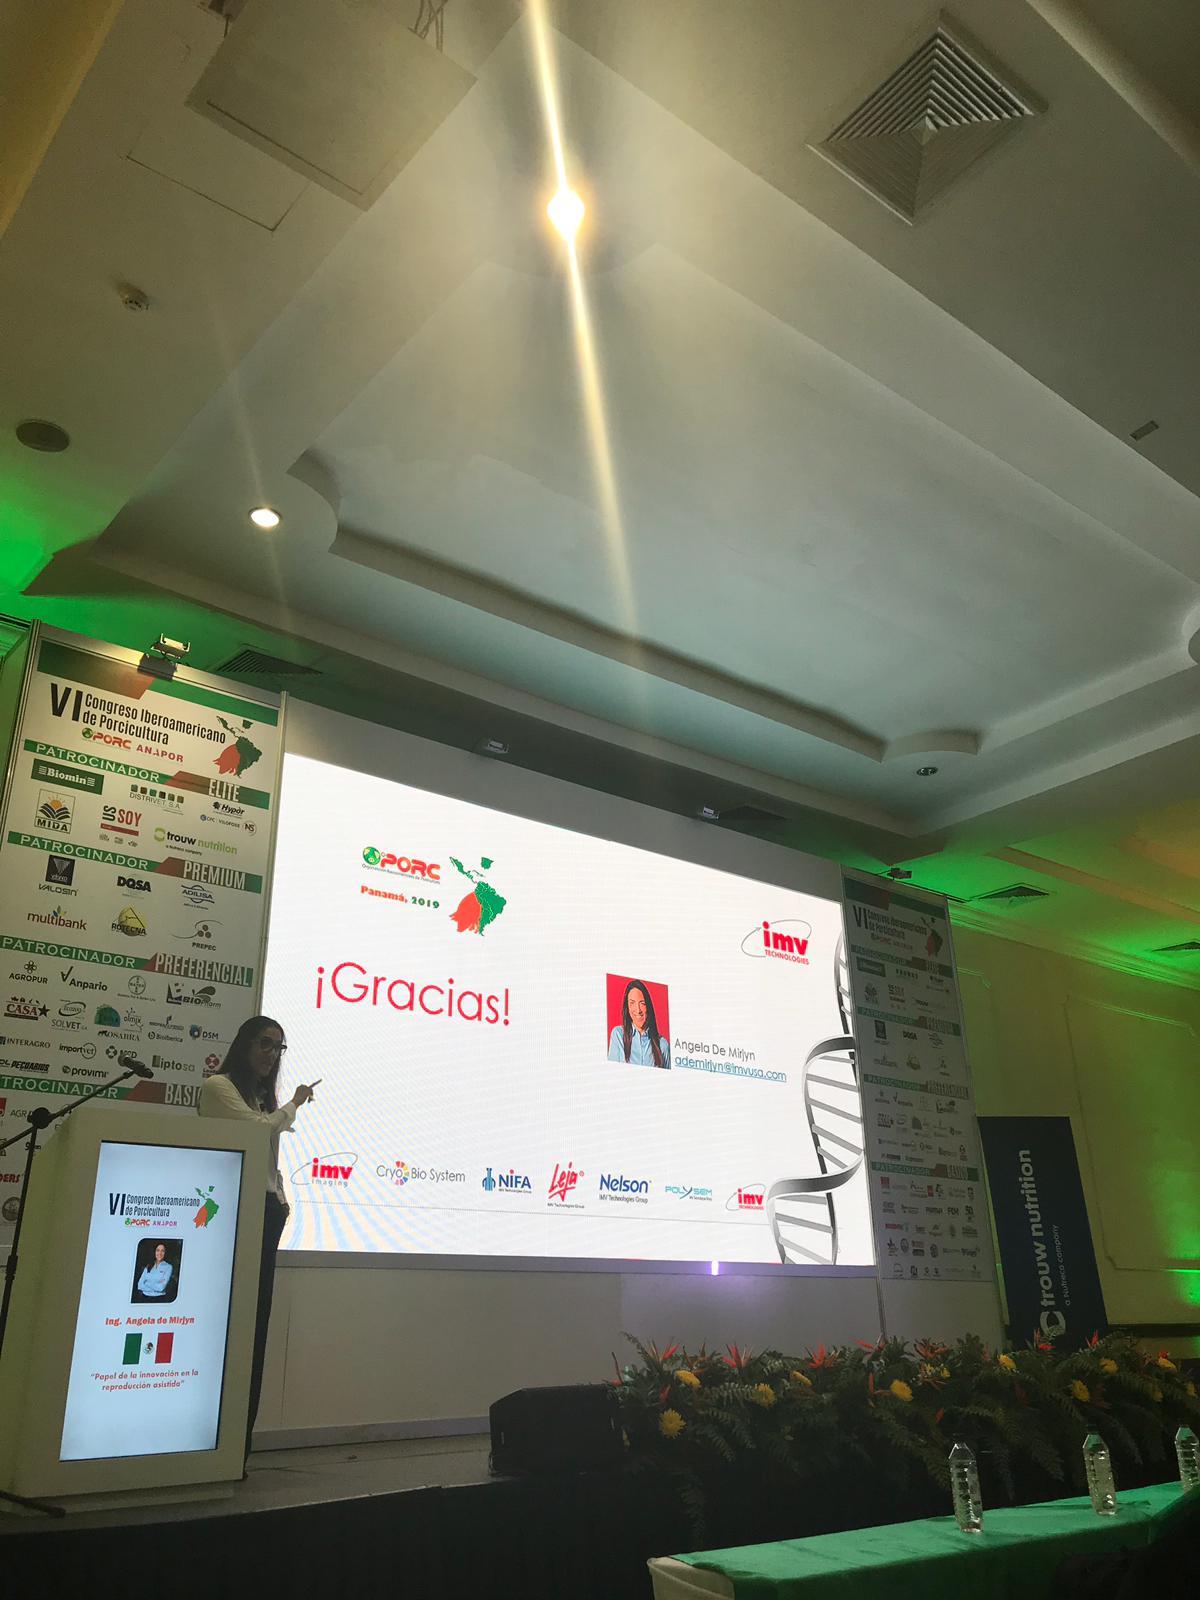 Great turnout to see IMV Technologies at OIPORC 2019 in Panama!